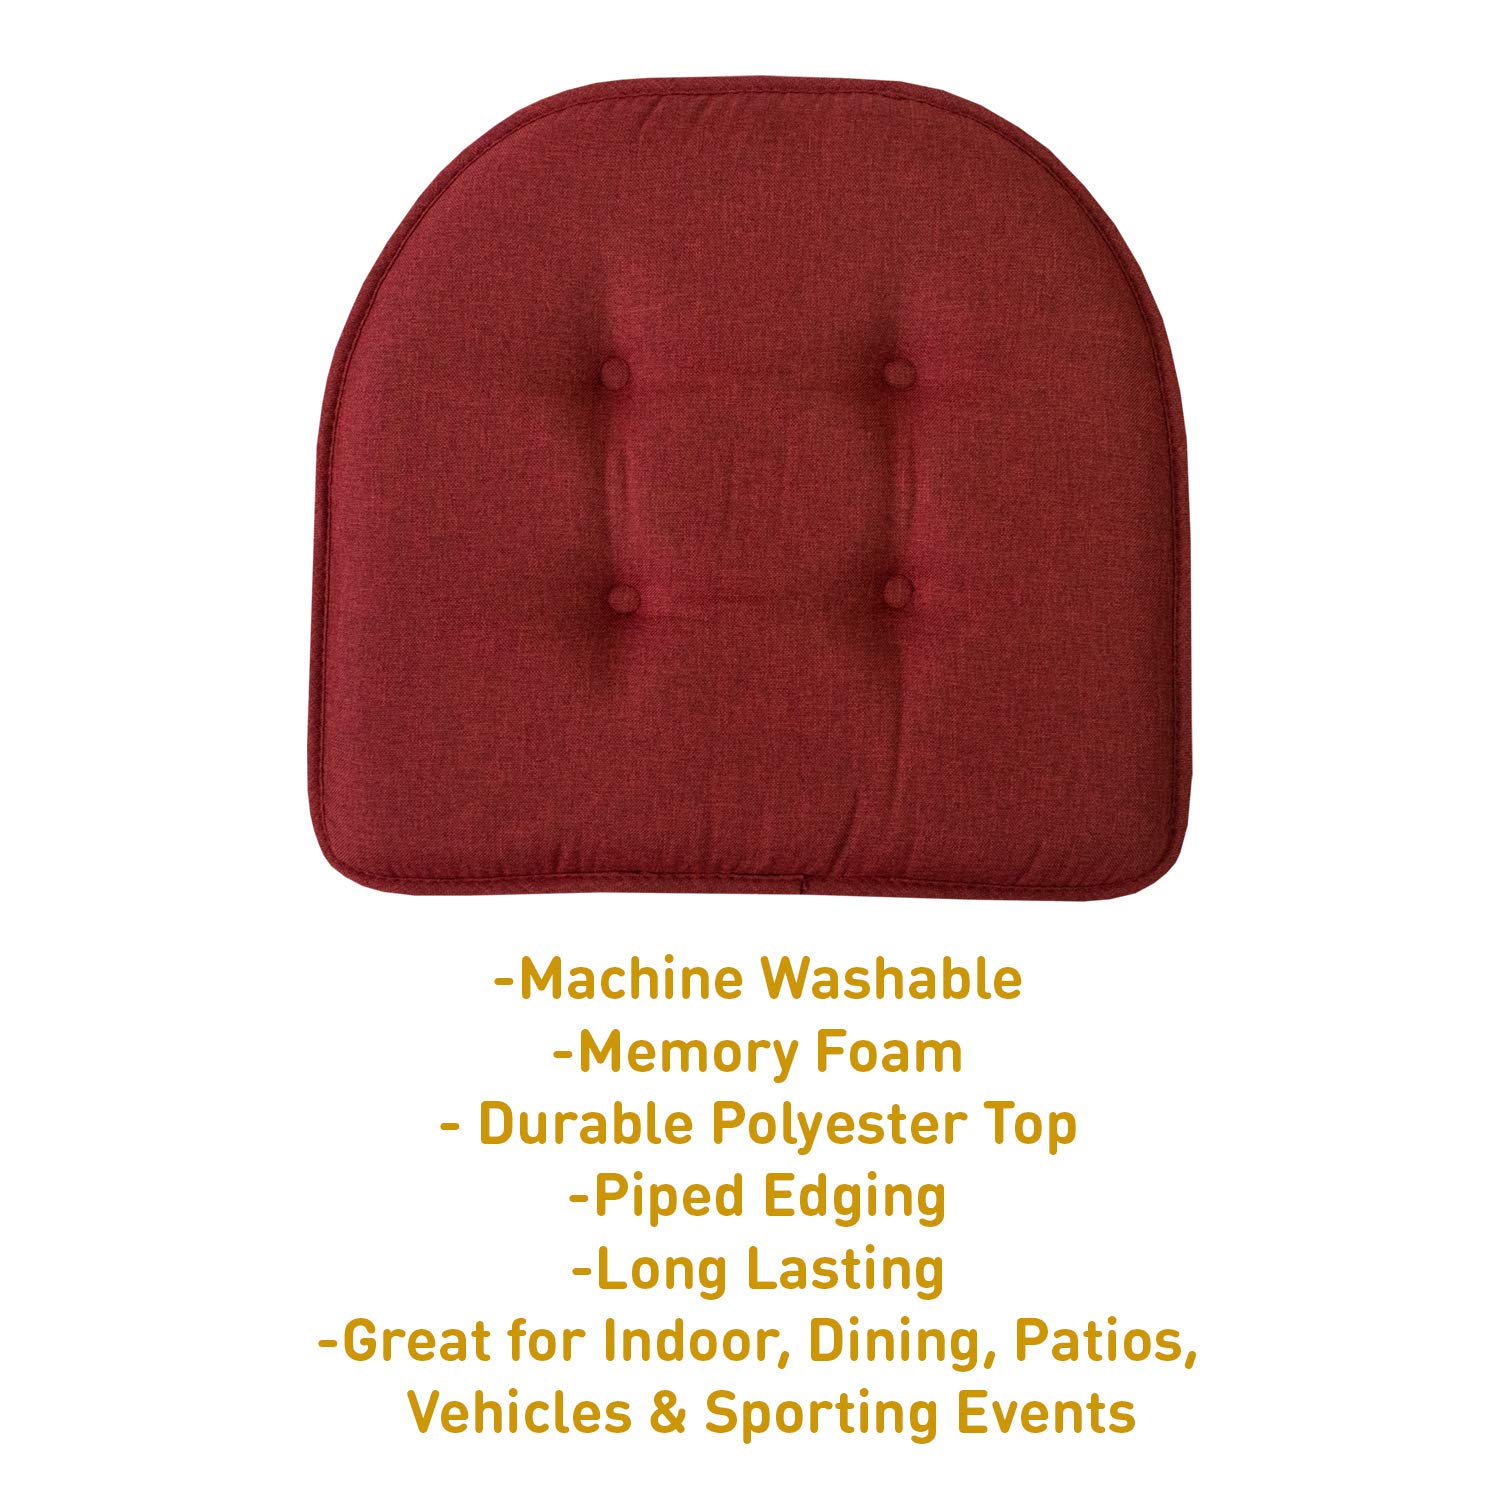 Sweet Home Collection Chair Cushion Memory Foam Pads Tufted Slip Non Skid Rubber Back U-Shaped 17" x 16" Seat Cover, 12 Count (Pack of 1), Wine Burgundy